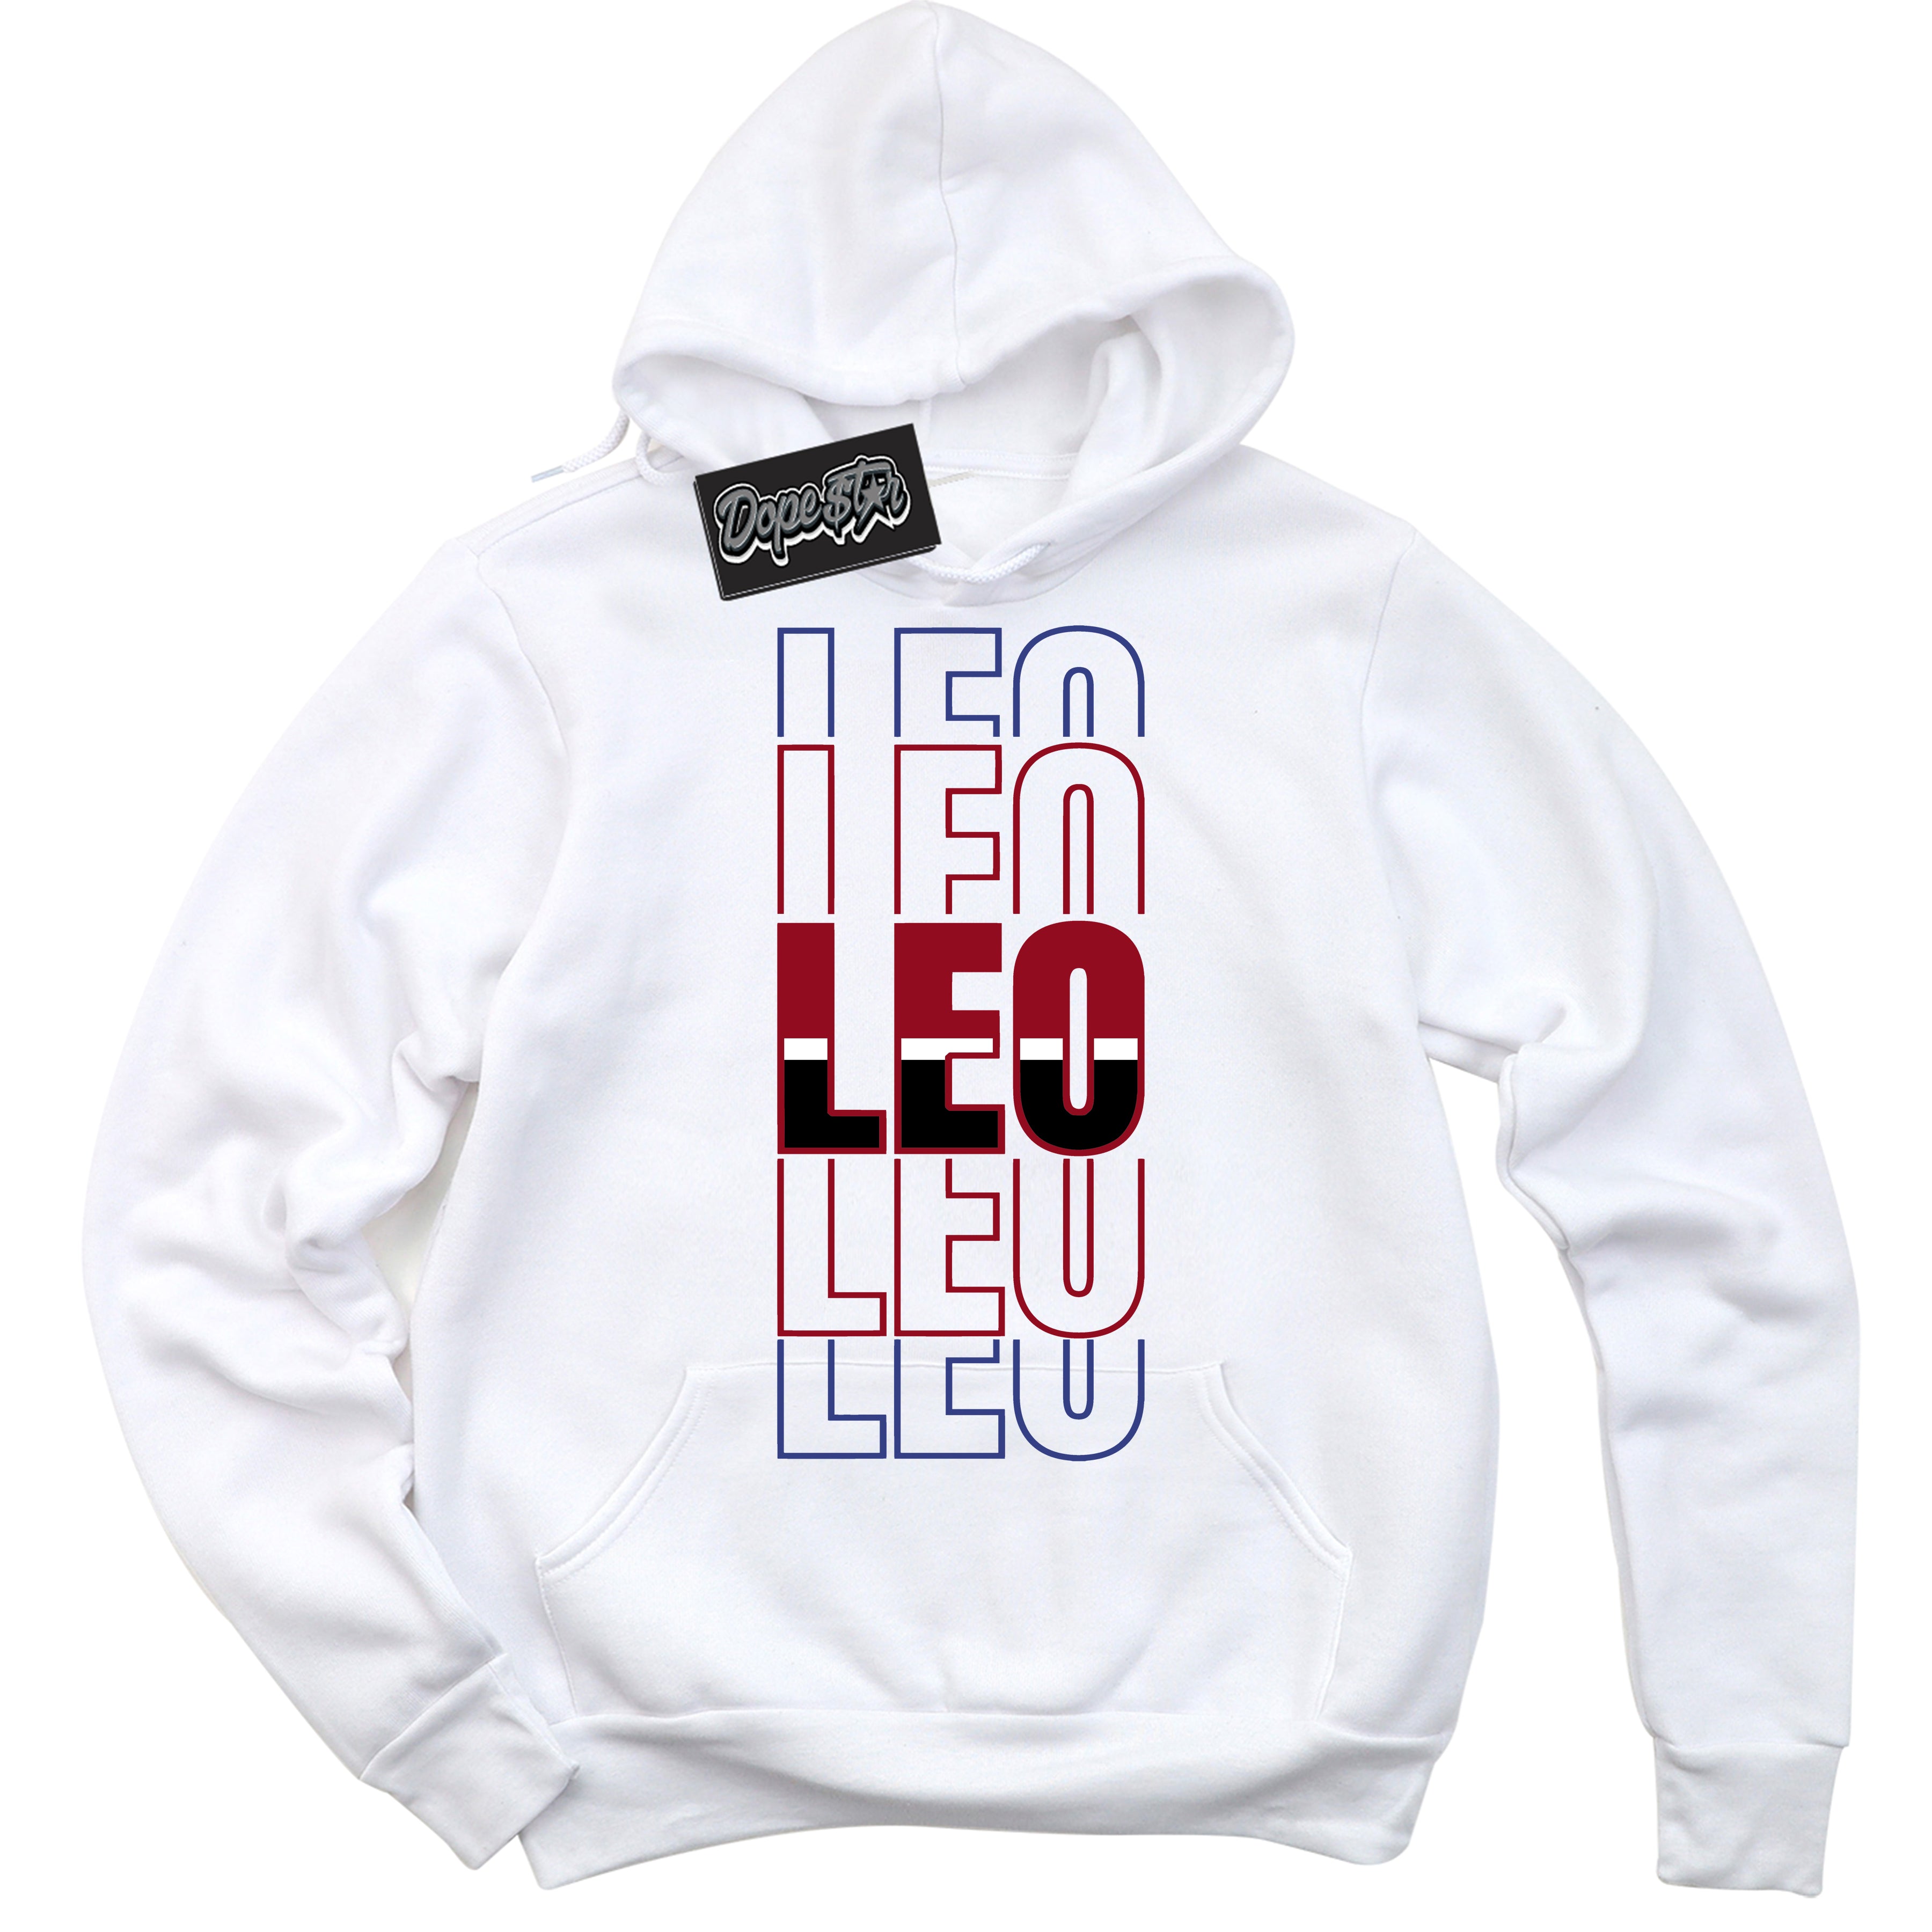 Cool White Hoodie with “ Leo ”  design that Perfectly Matches Playoffs 8s Sneakers.